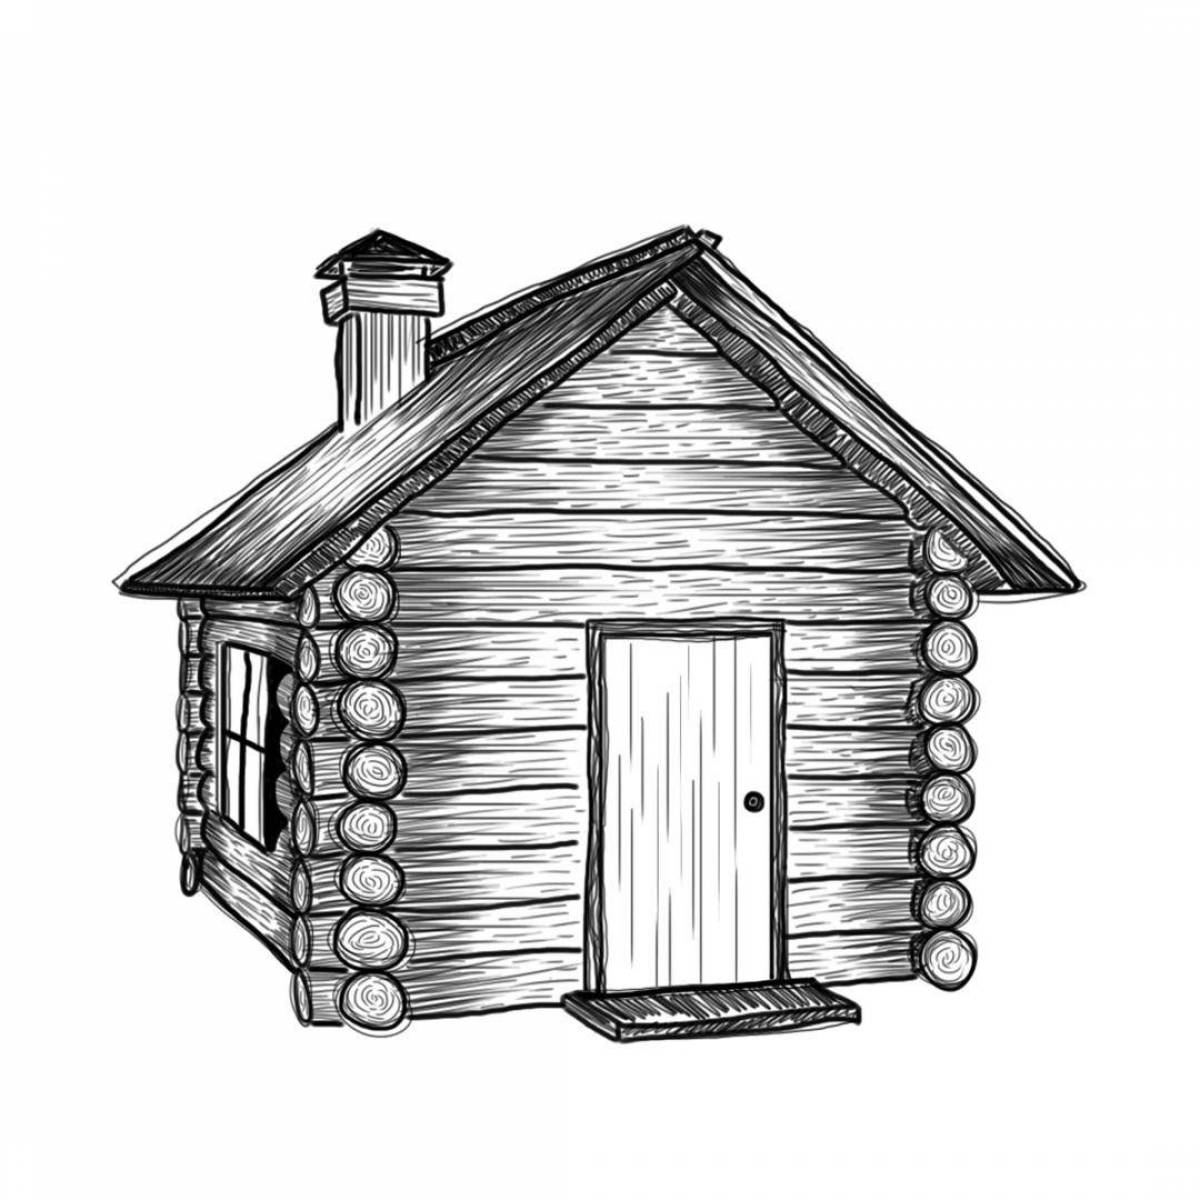 Historical coloring of traditional dwellings